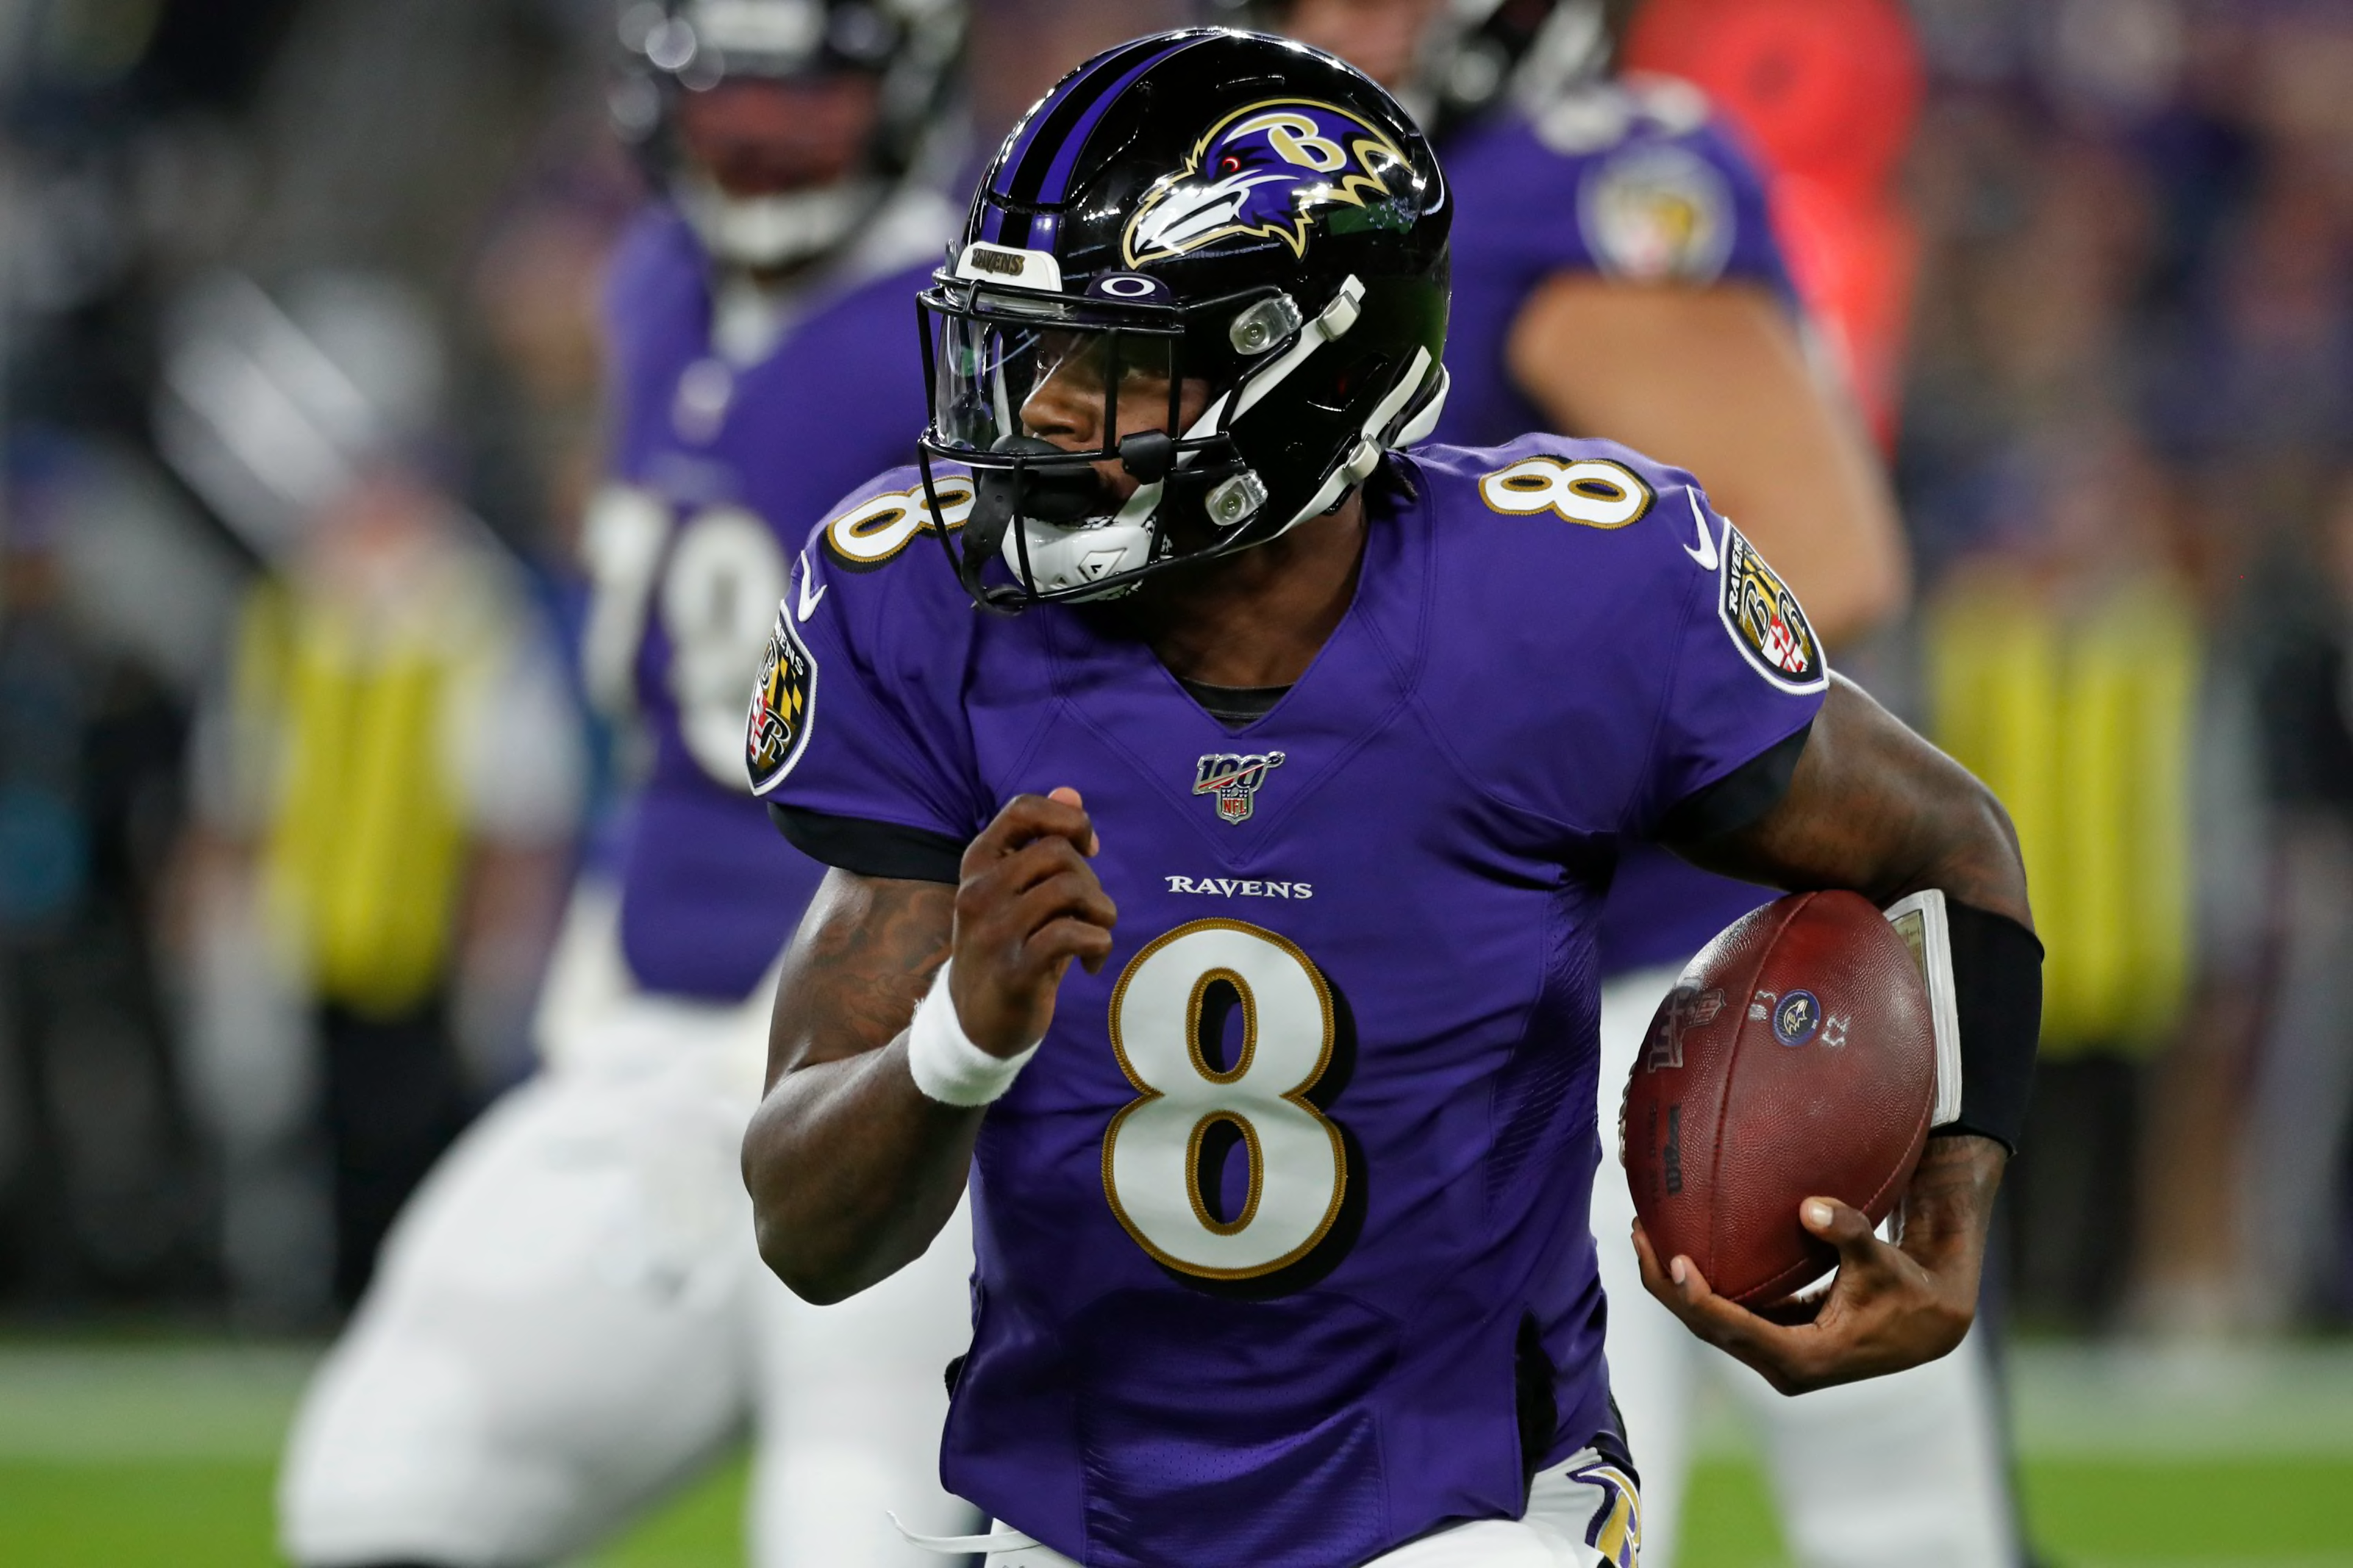 Fantasy Football Rankings 2020: Half-PPR tiers for each position